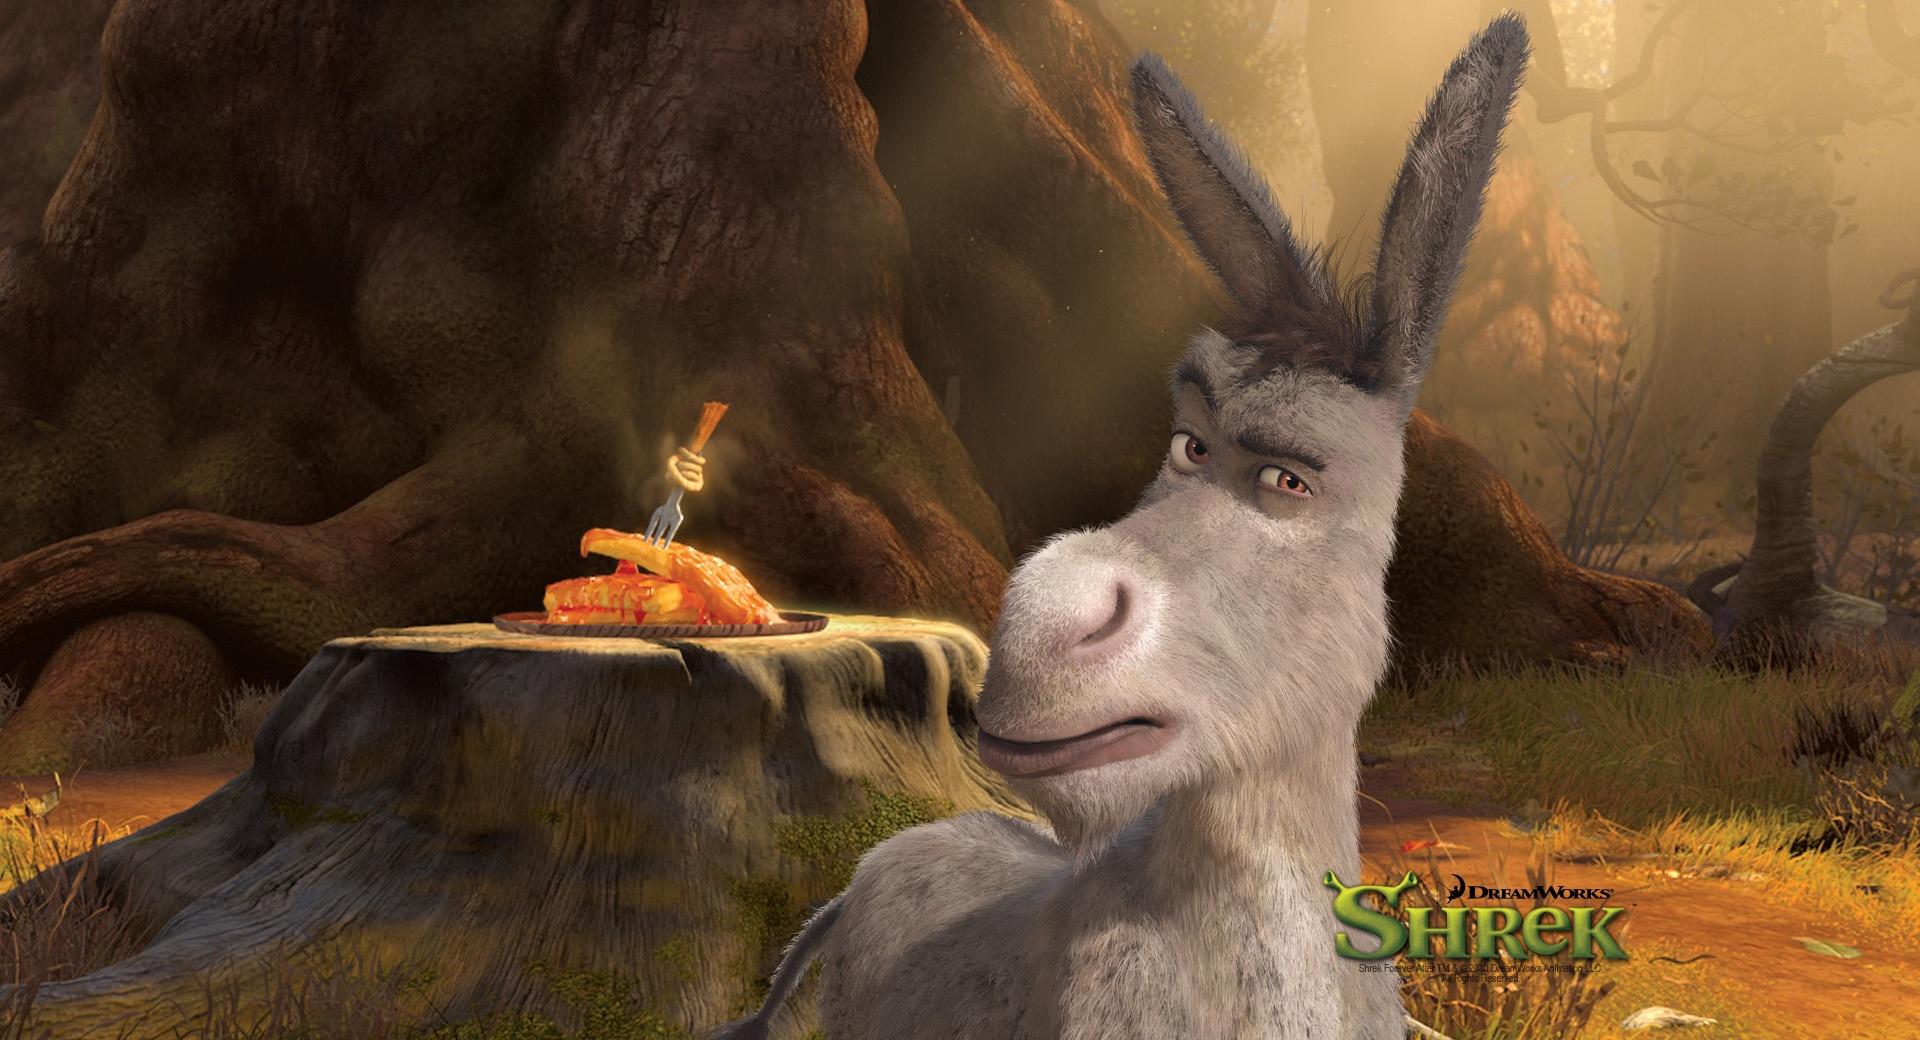 Donkey, Shrek Forever After wallpapers HD quality